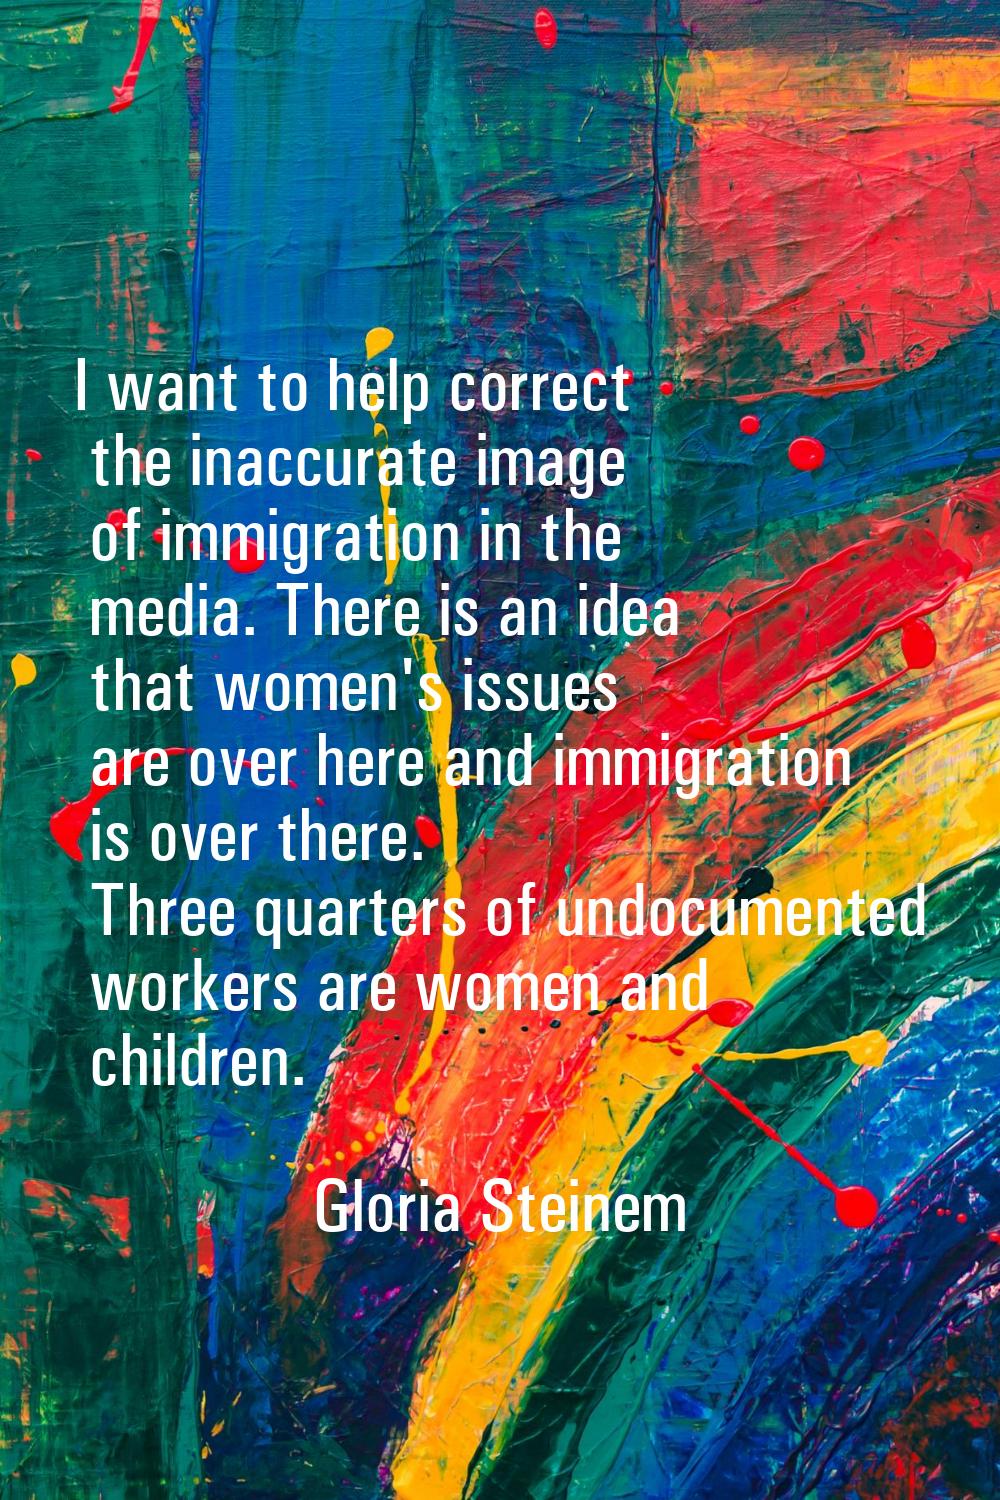 I want to help correct the inaccurate image of immigration in the media. There is an idea that wome